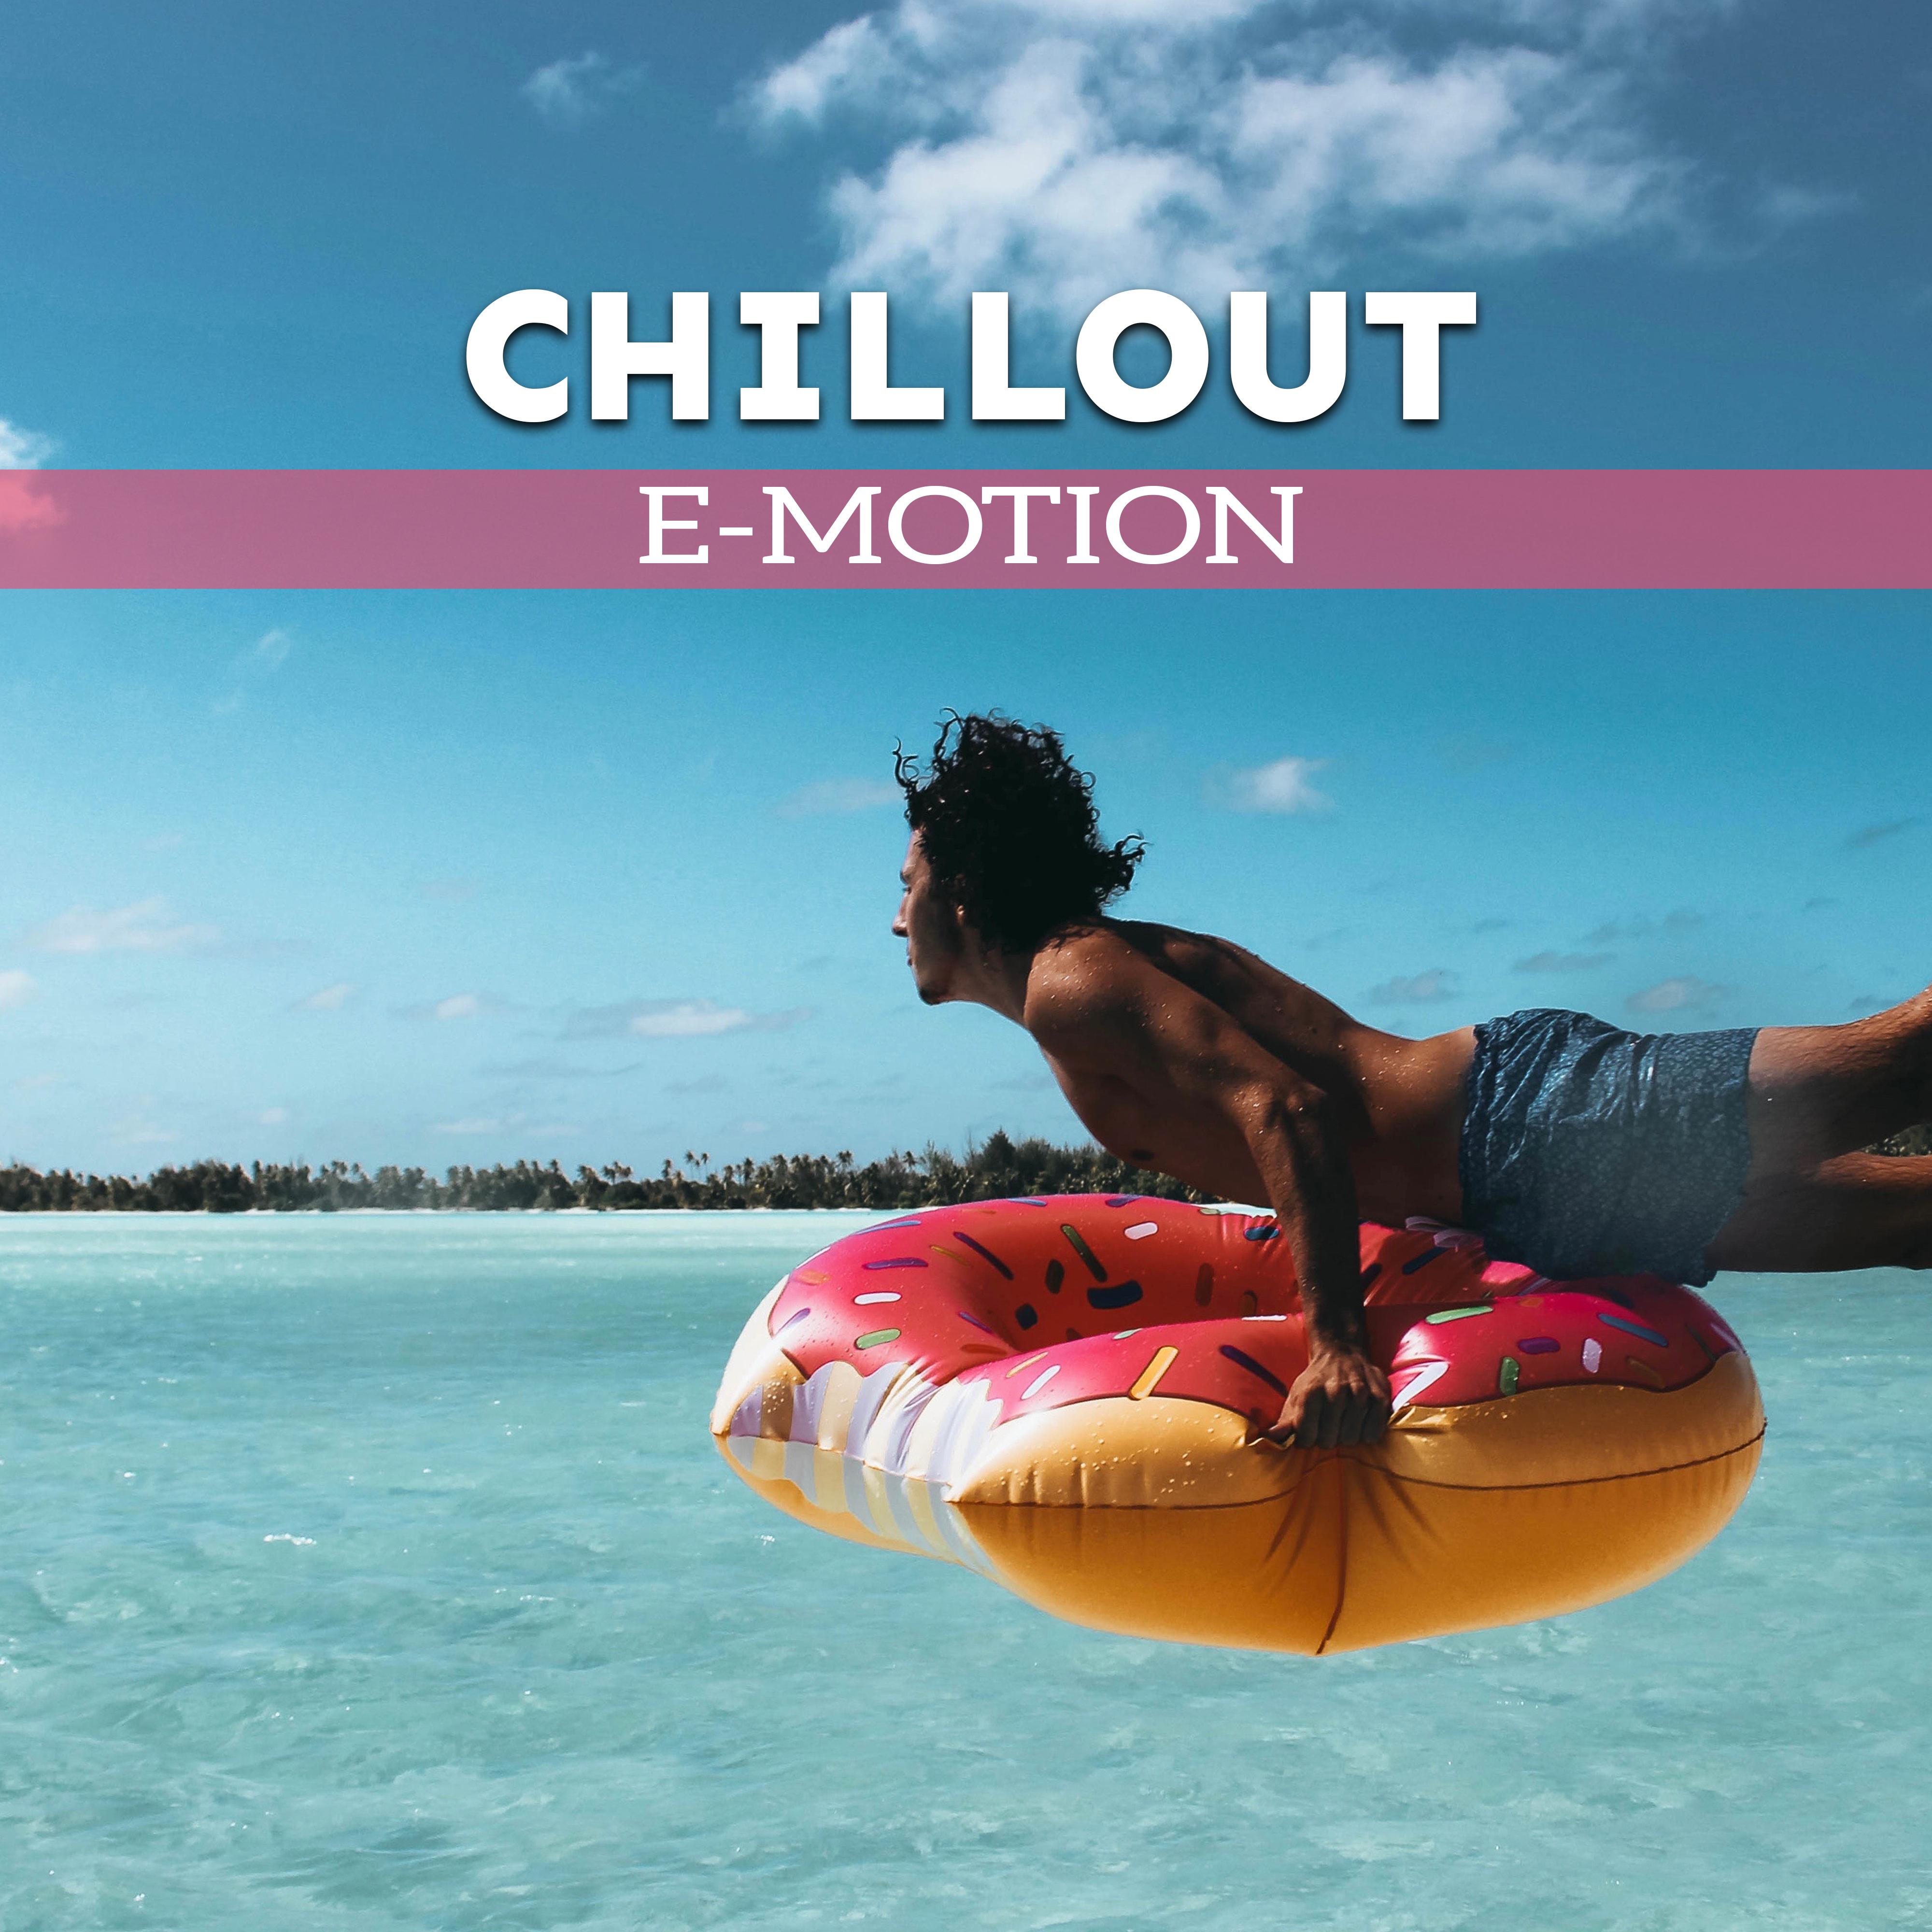 Chillout E-Motion – Chill Out 2018, Summer Music